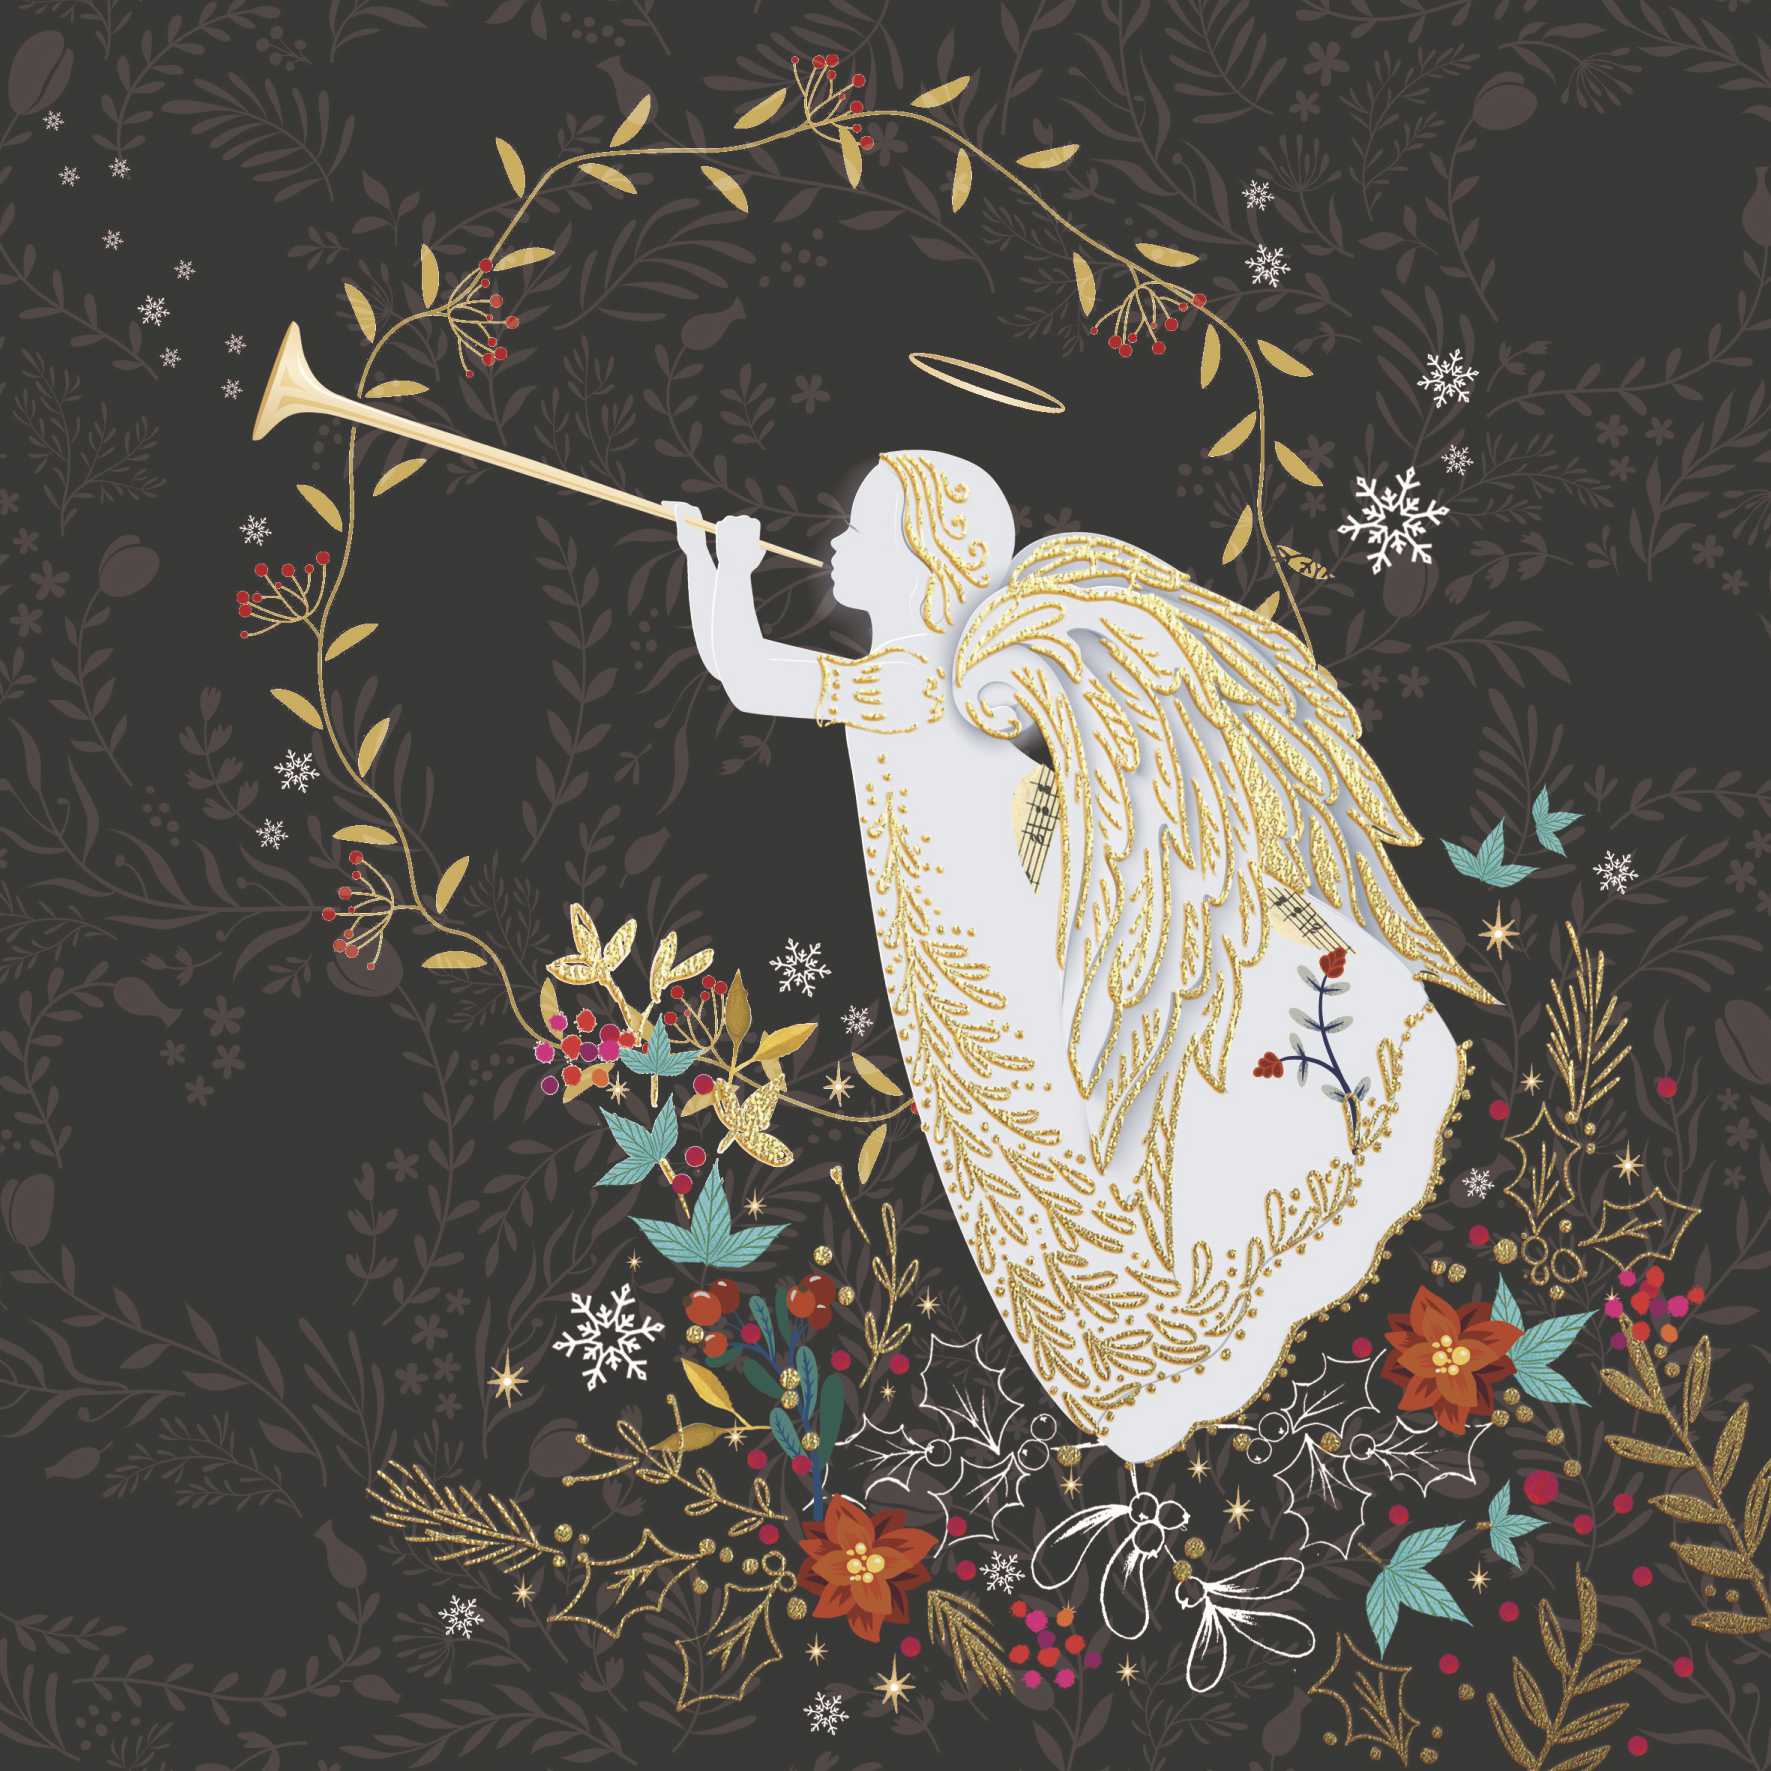 Illustration. A gold embossed angel with a large flute in front of a dark background. There are leaves and flowers surrounding the angel.